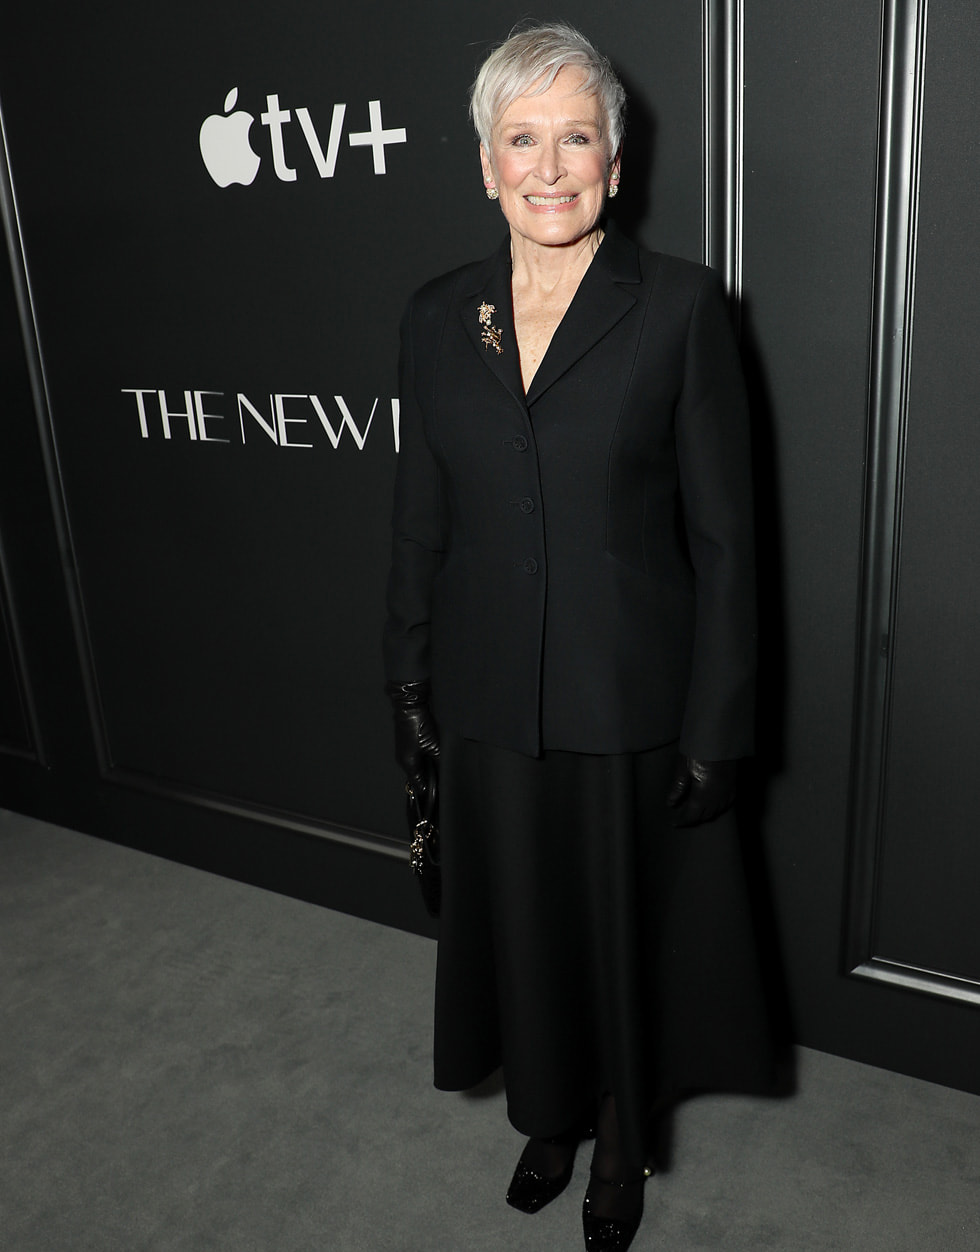 Glenn Close attends the premiere of the Apple TV+ thrilling series “The New Look” at Florence Gould Hall. “The New Look” will make its global debut on Apple TV+ on Wednesday, 14 February 2024.